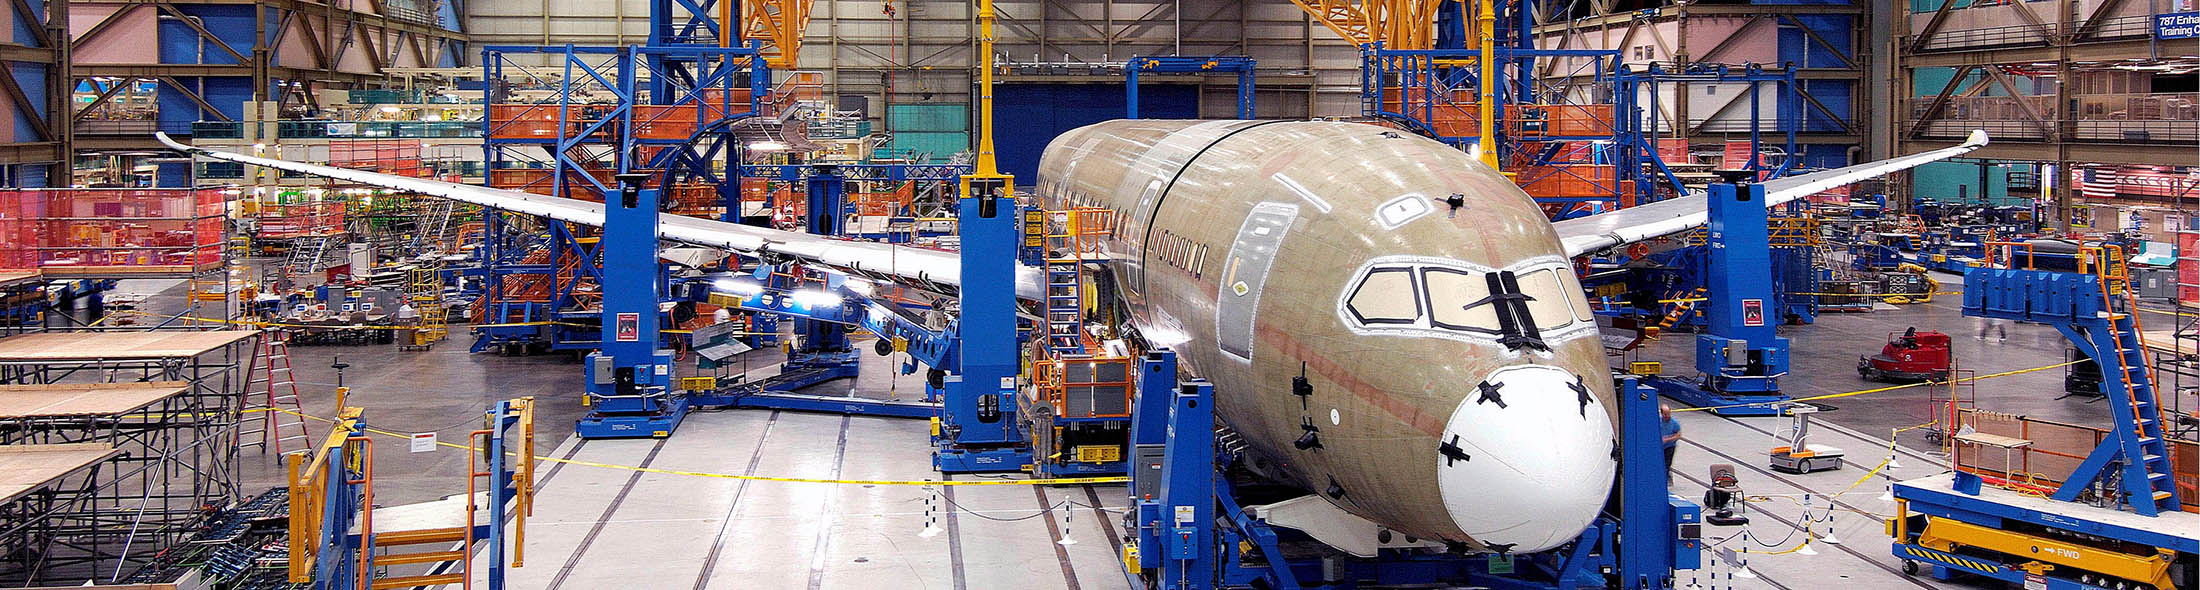 epa01905515 (FILE) A file photograph showing the start of final assembly on 15 February 2008 on the second flight-test airplane for the new Boeing 787 Dreamliner aircraft. US aerospace giant Boeing reported 21 October 2009 it lost almost 1.6 billion dollars in the third quarter of 2009 amid heavy costs related to production problems, with the company drastically lowering its 2009 profit target. The figure - worse than industry analysts? expectations - compares with a profit of 695 million dollars in the same period last year. EPA/THE BOEING COMPANY / HO EDITORIAL USE ONLY *** Local Caption *** 00000401770963
